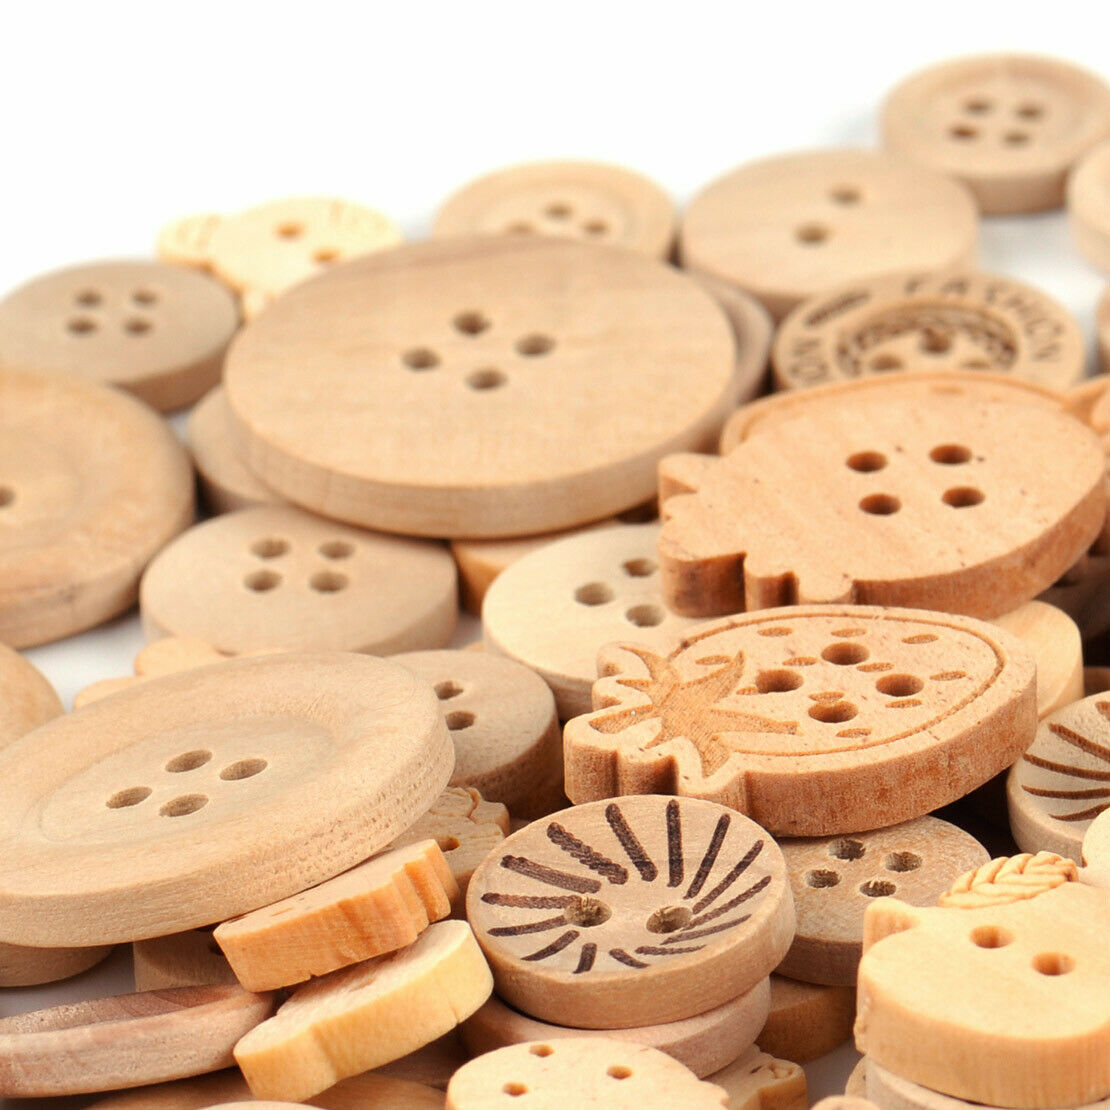 100x 4 Holes Mixed Shape Fruits Animals Wooden Buttons for DIY Sewing Craft An